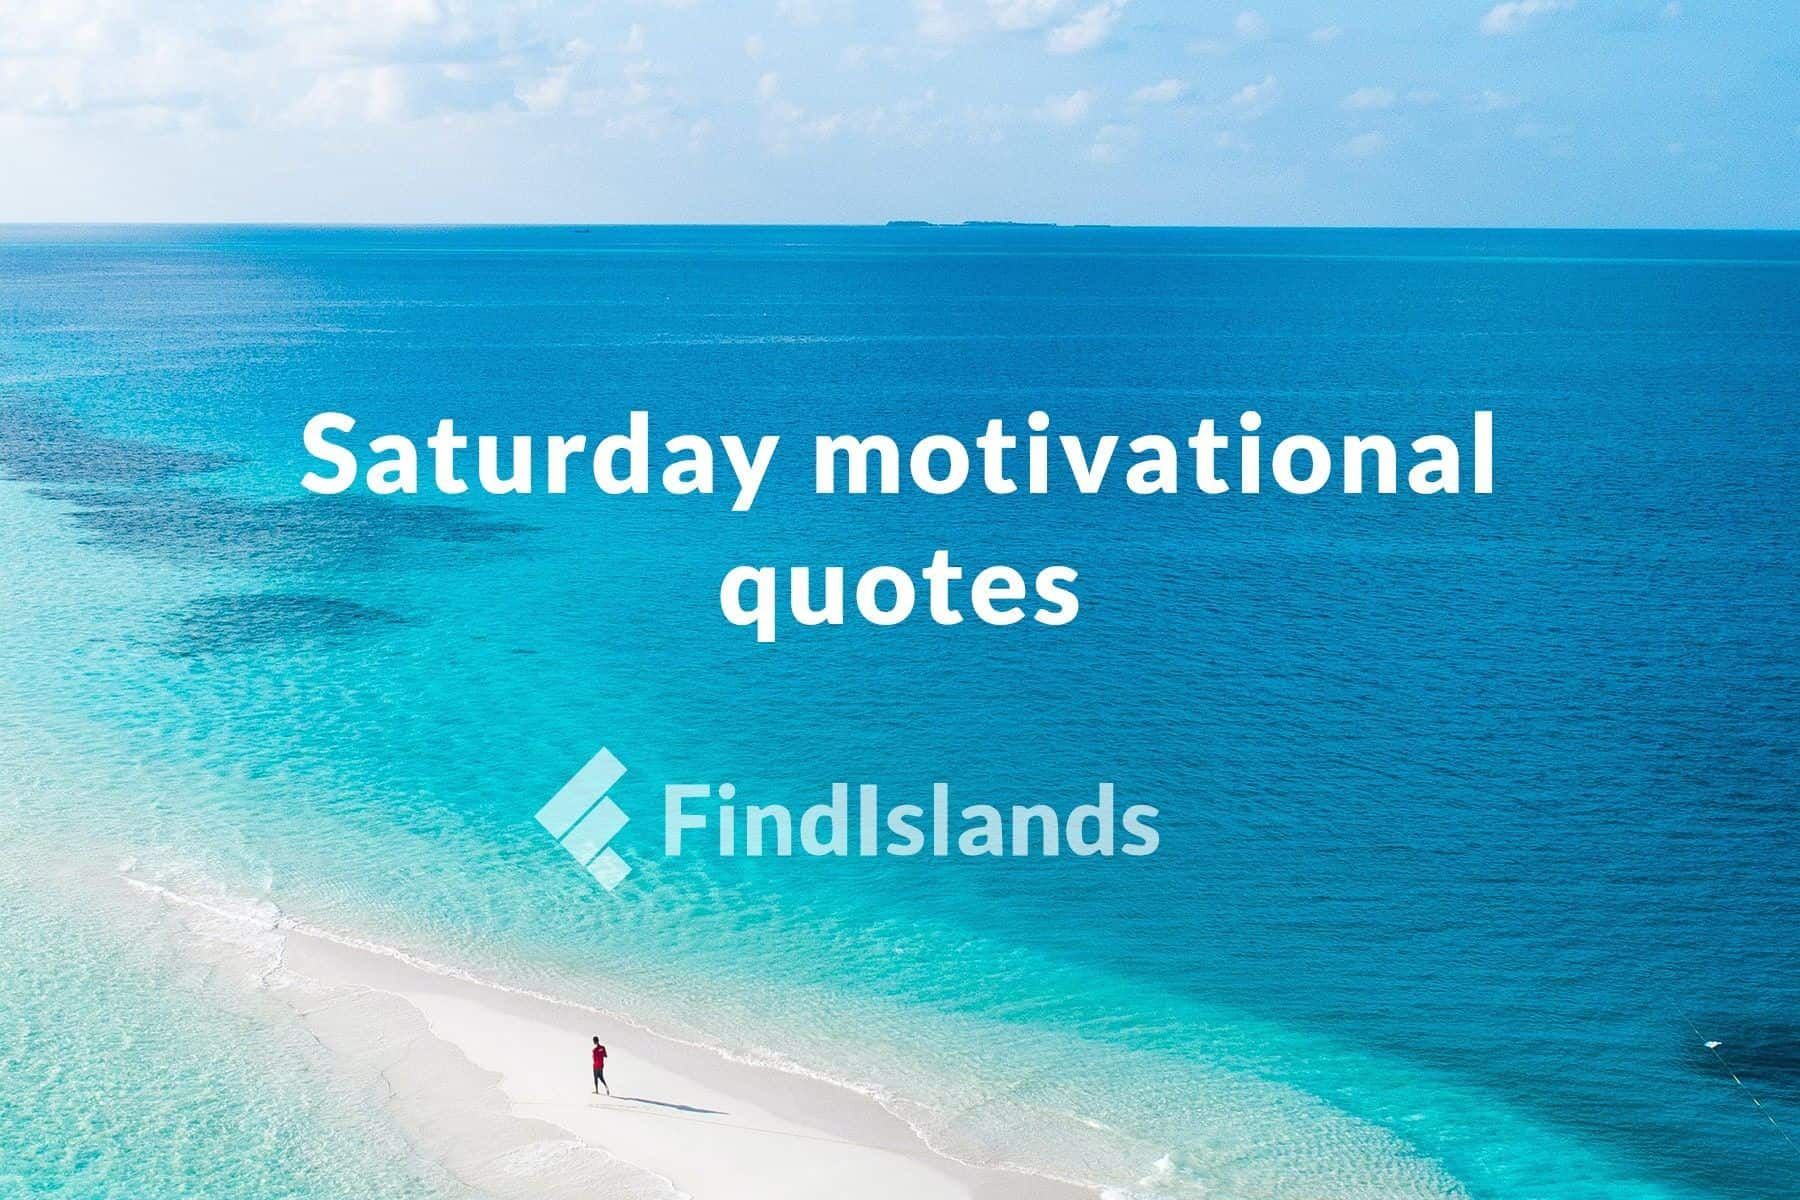 Saturday motivational quotes – Make every day your lucky day